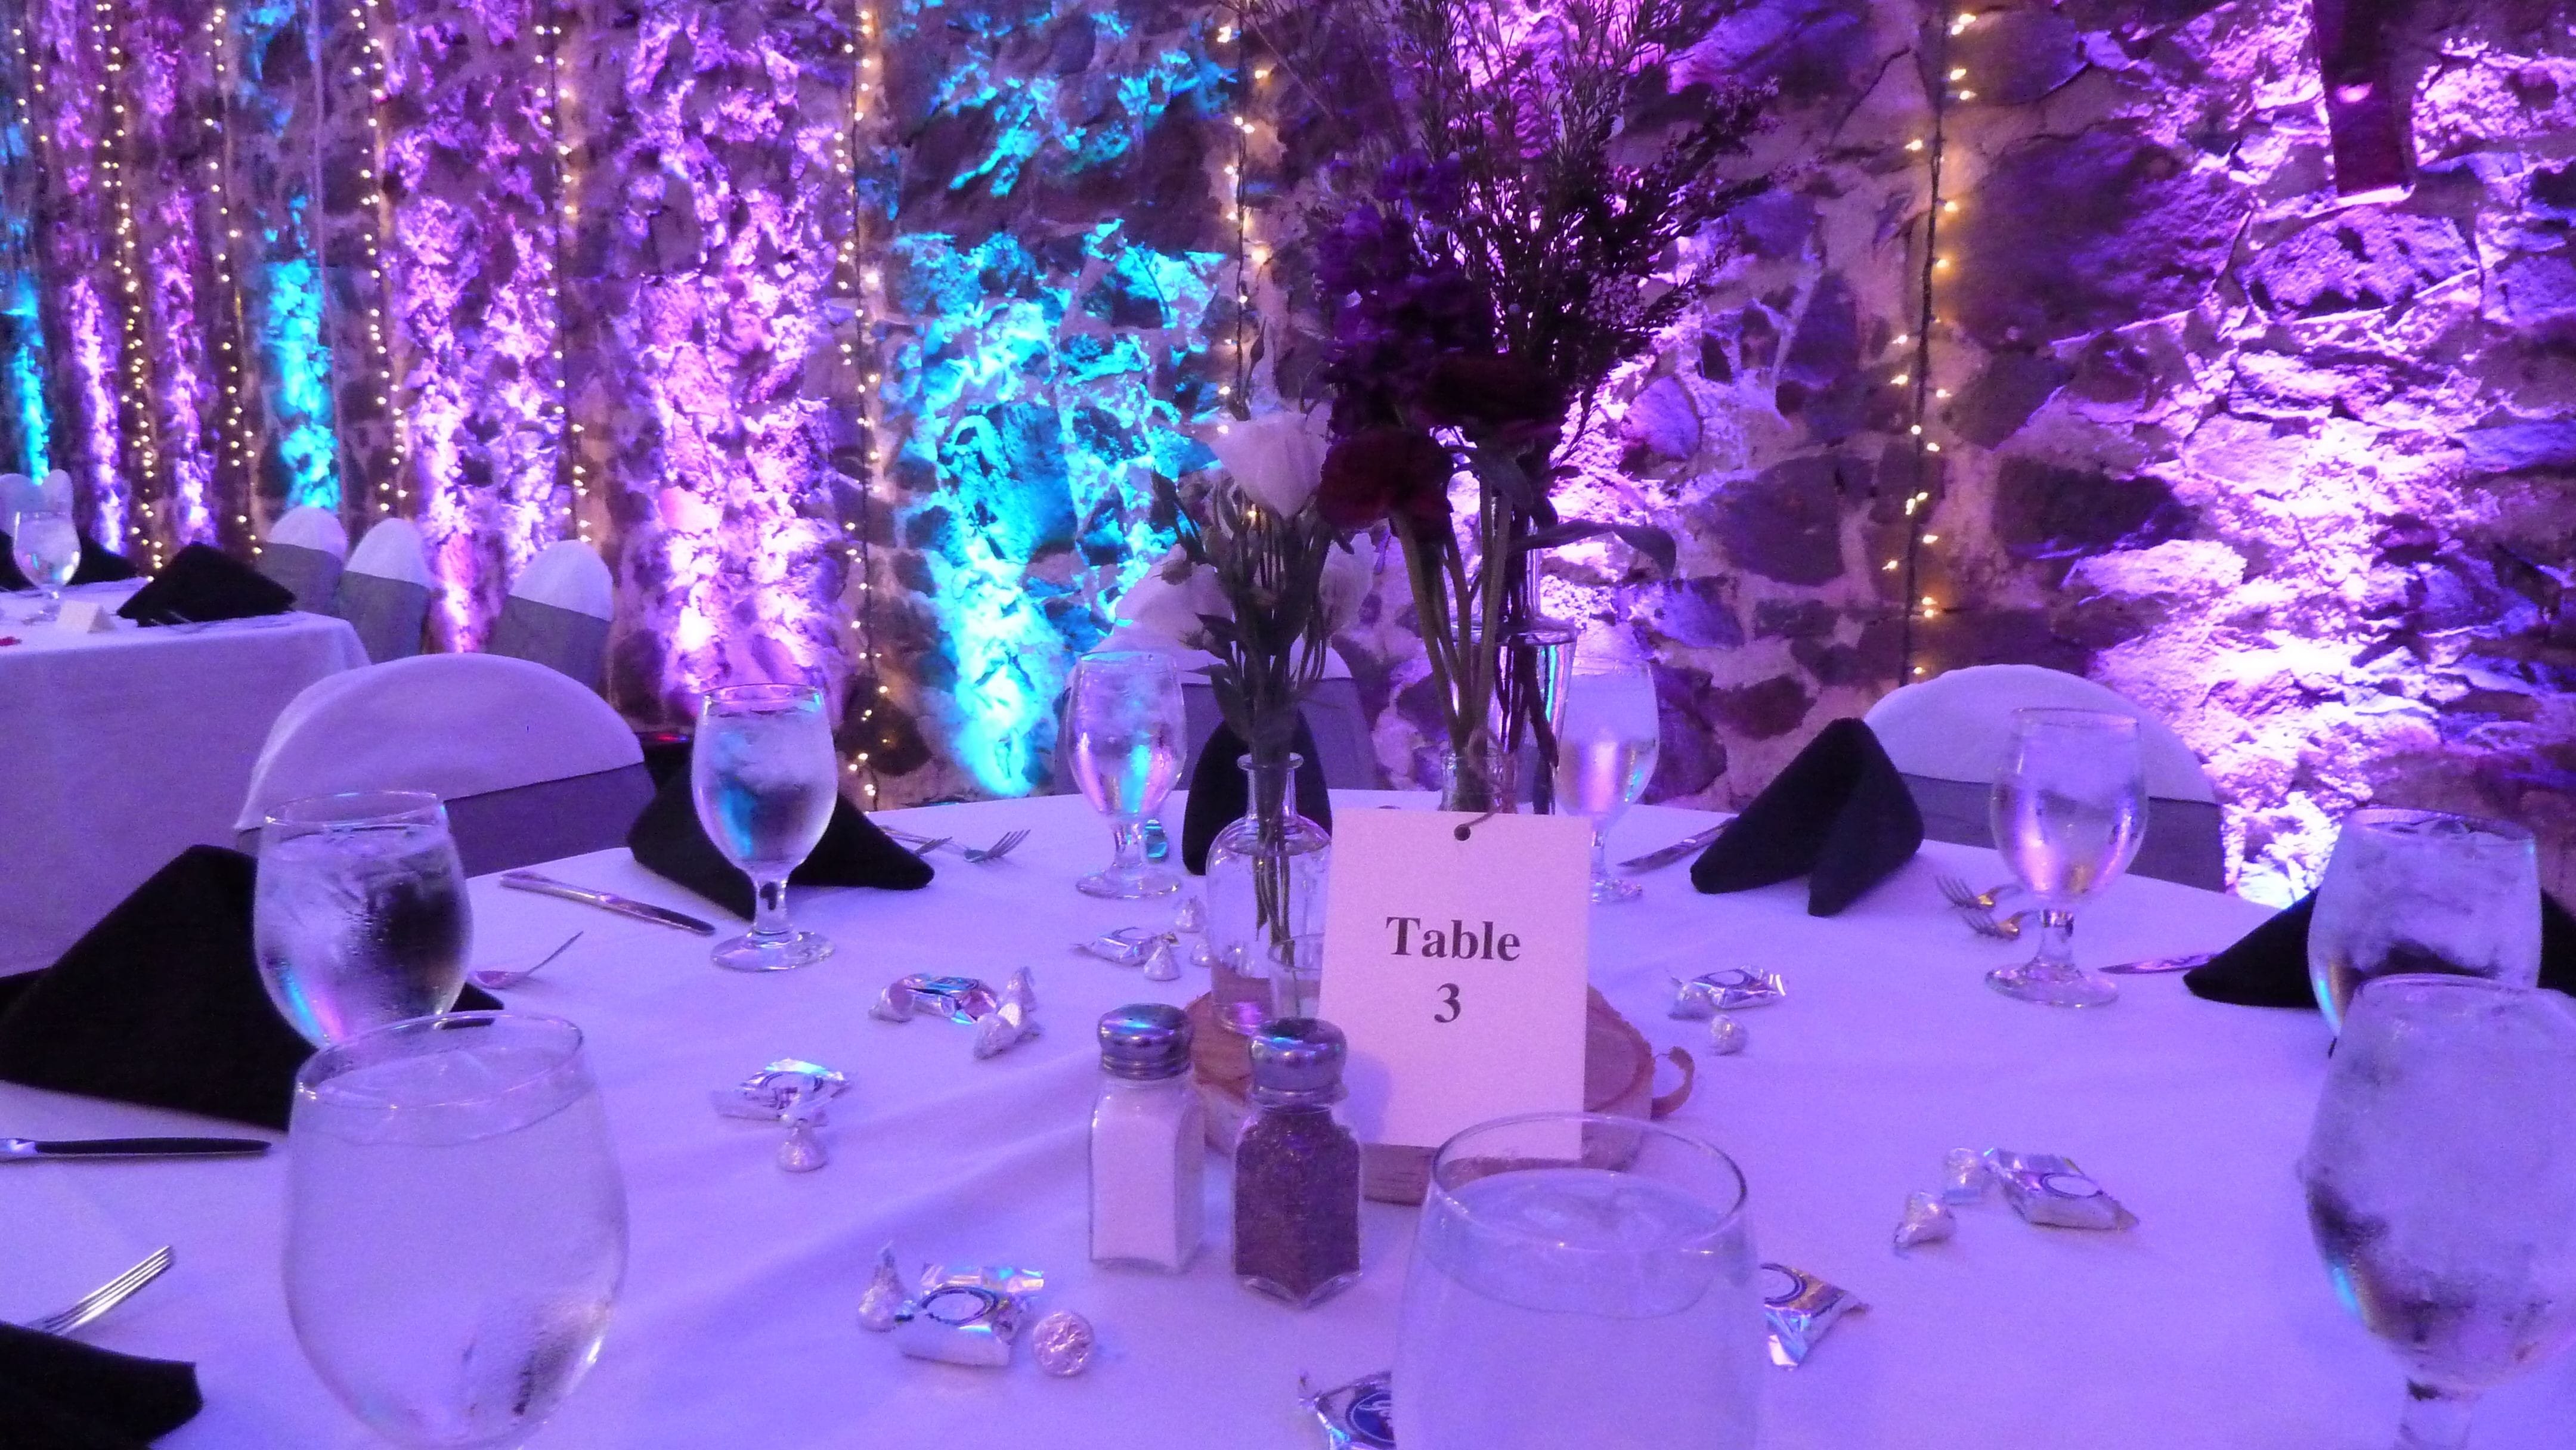 Wedding lighting in the August Fitger's room. Up lighting in purple and blue.